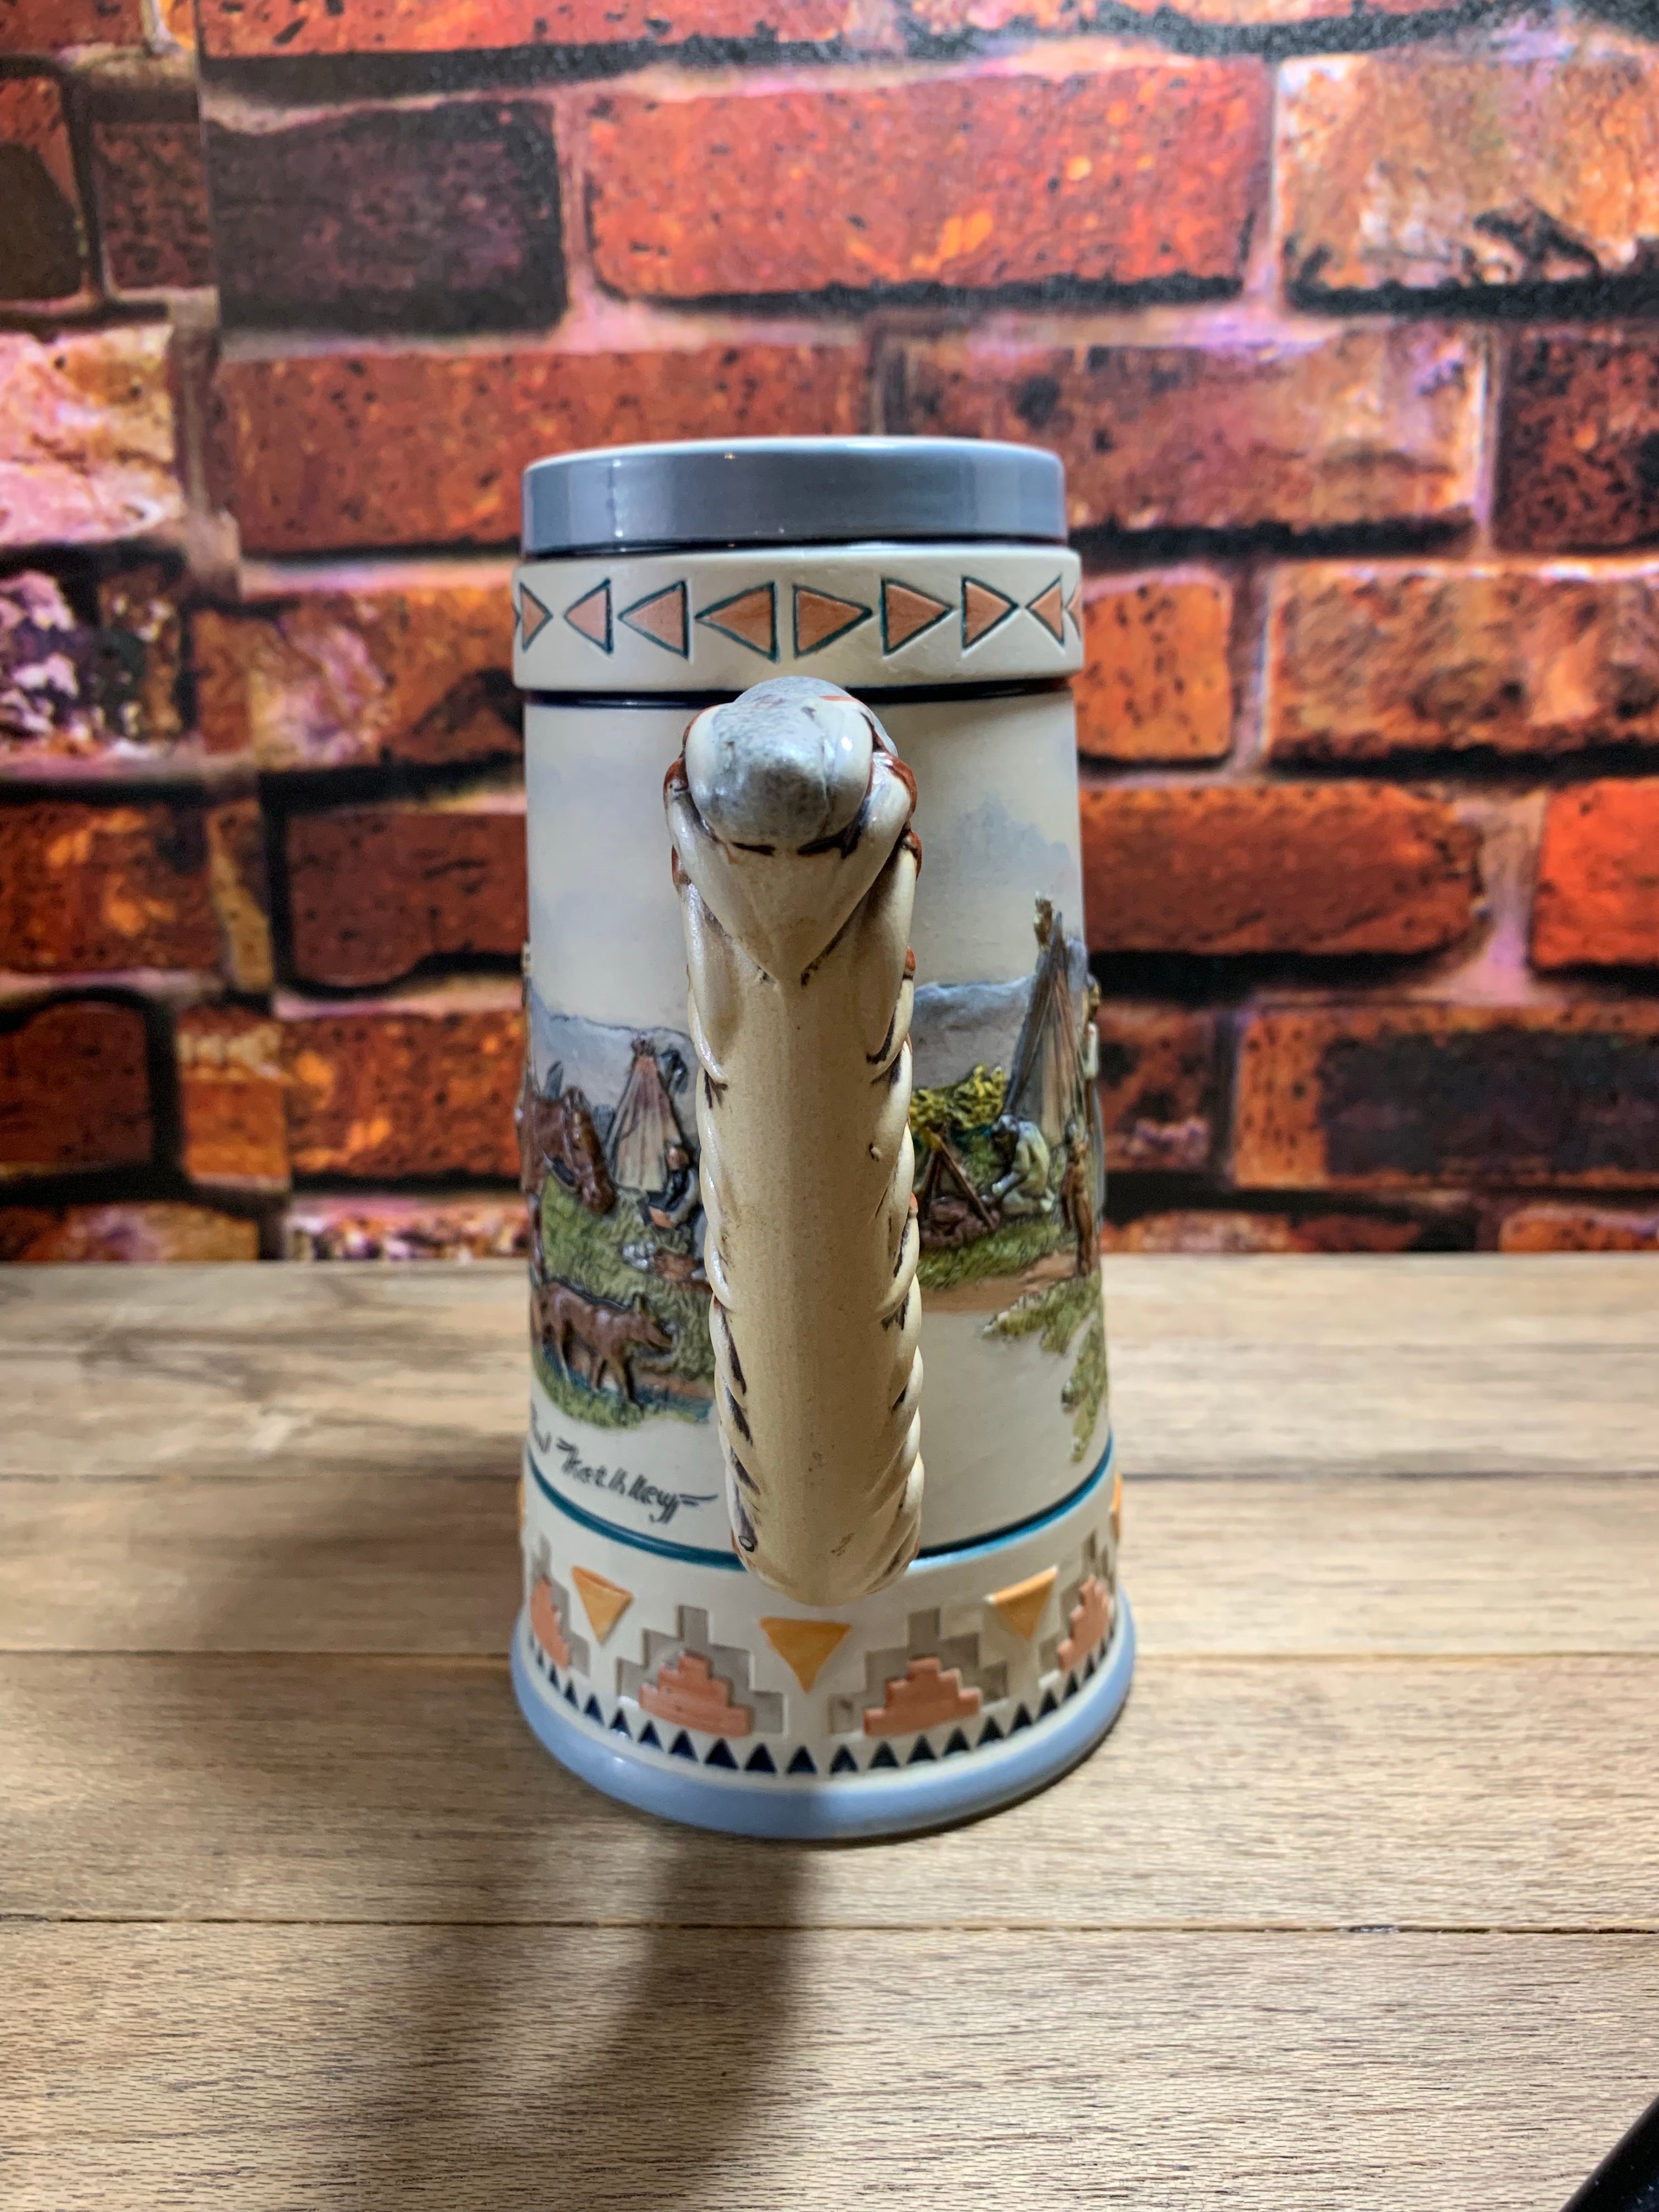 Vintage Fine Bisque Porcelain Beer-Stein The Story Teller by Paul Kethley